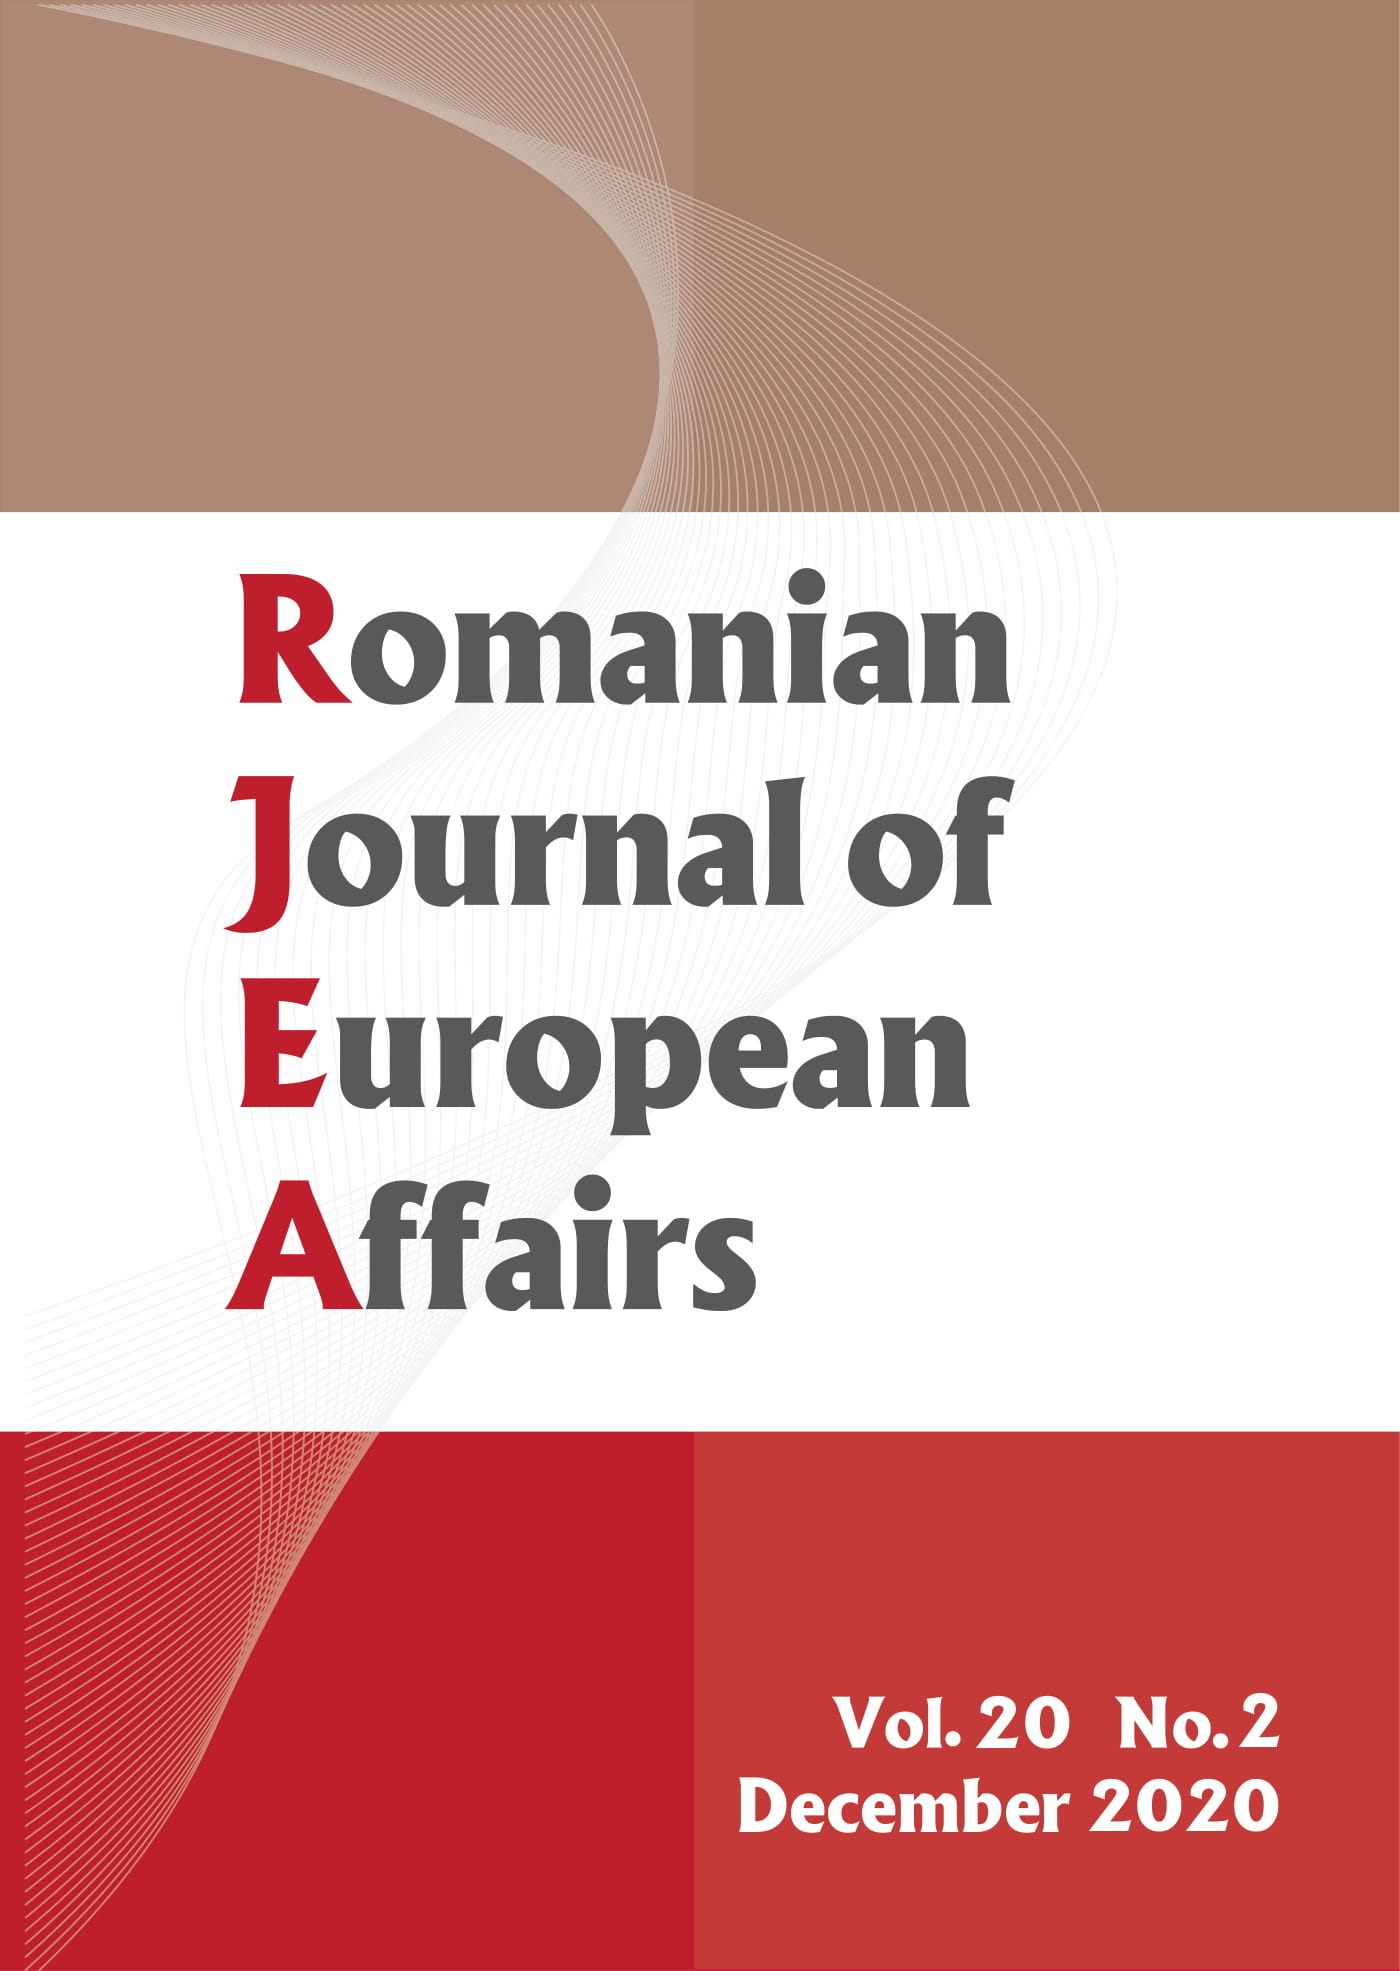 Disinformation campaigns in the European
Union: Lessons learned from the 2019 European
Elections and 2020 Covid-19 infodemic in
Romania Cover Image